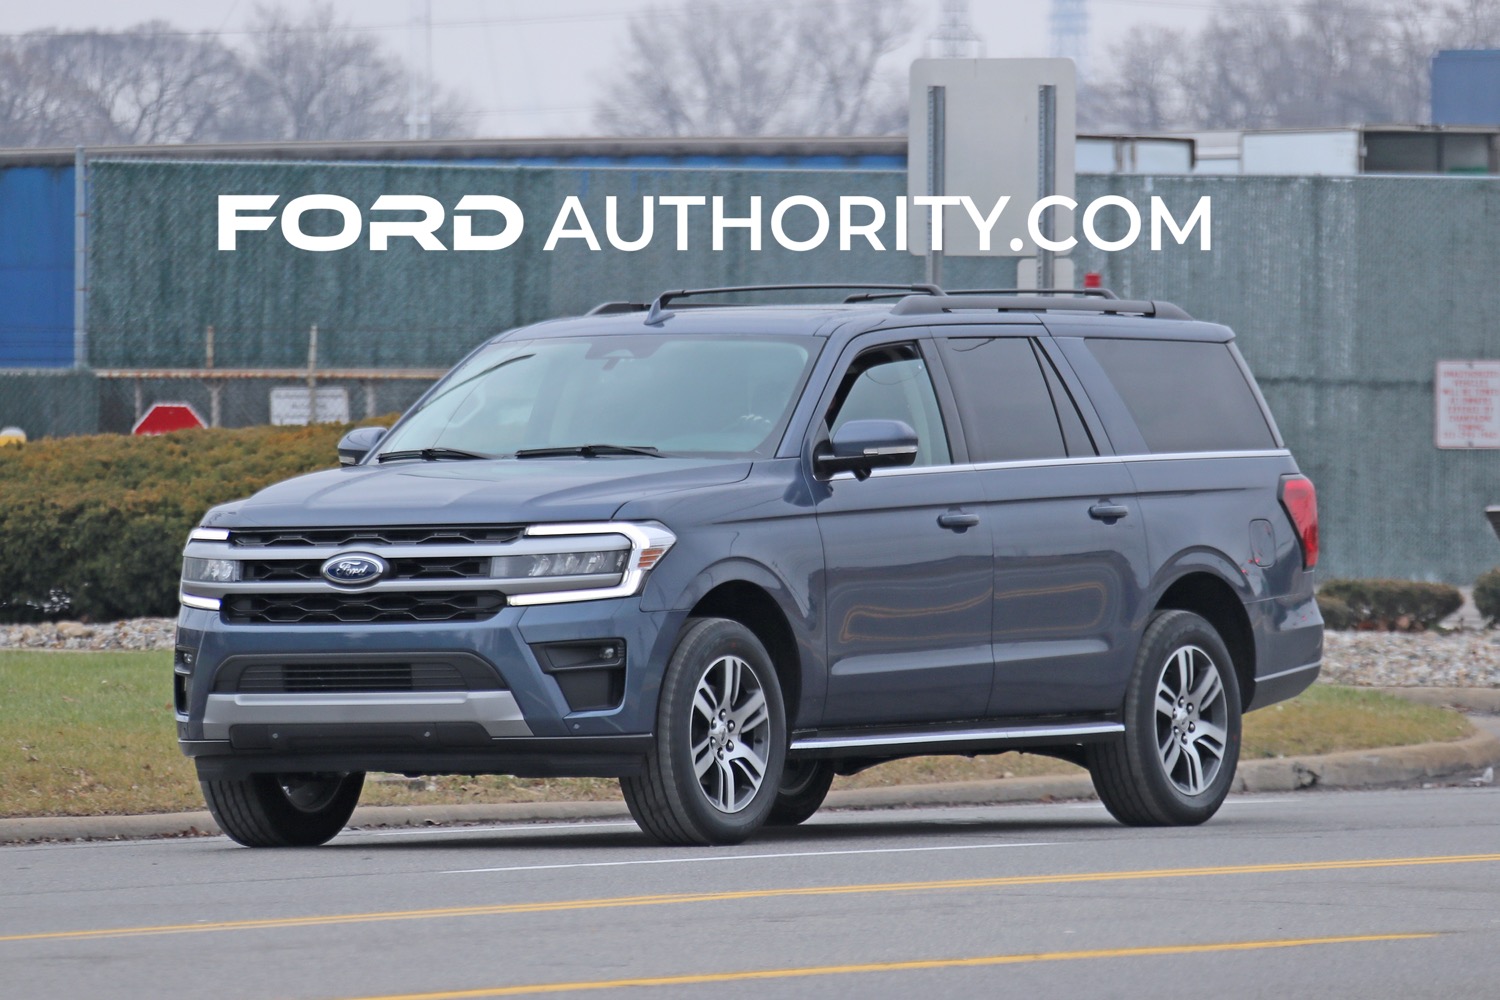 2022 Ford Expedition XLT Max: Real World Photo Gallery